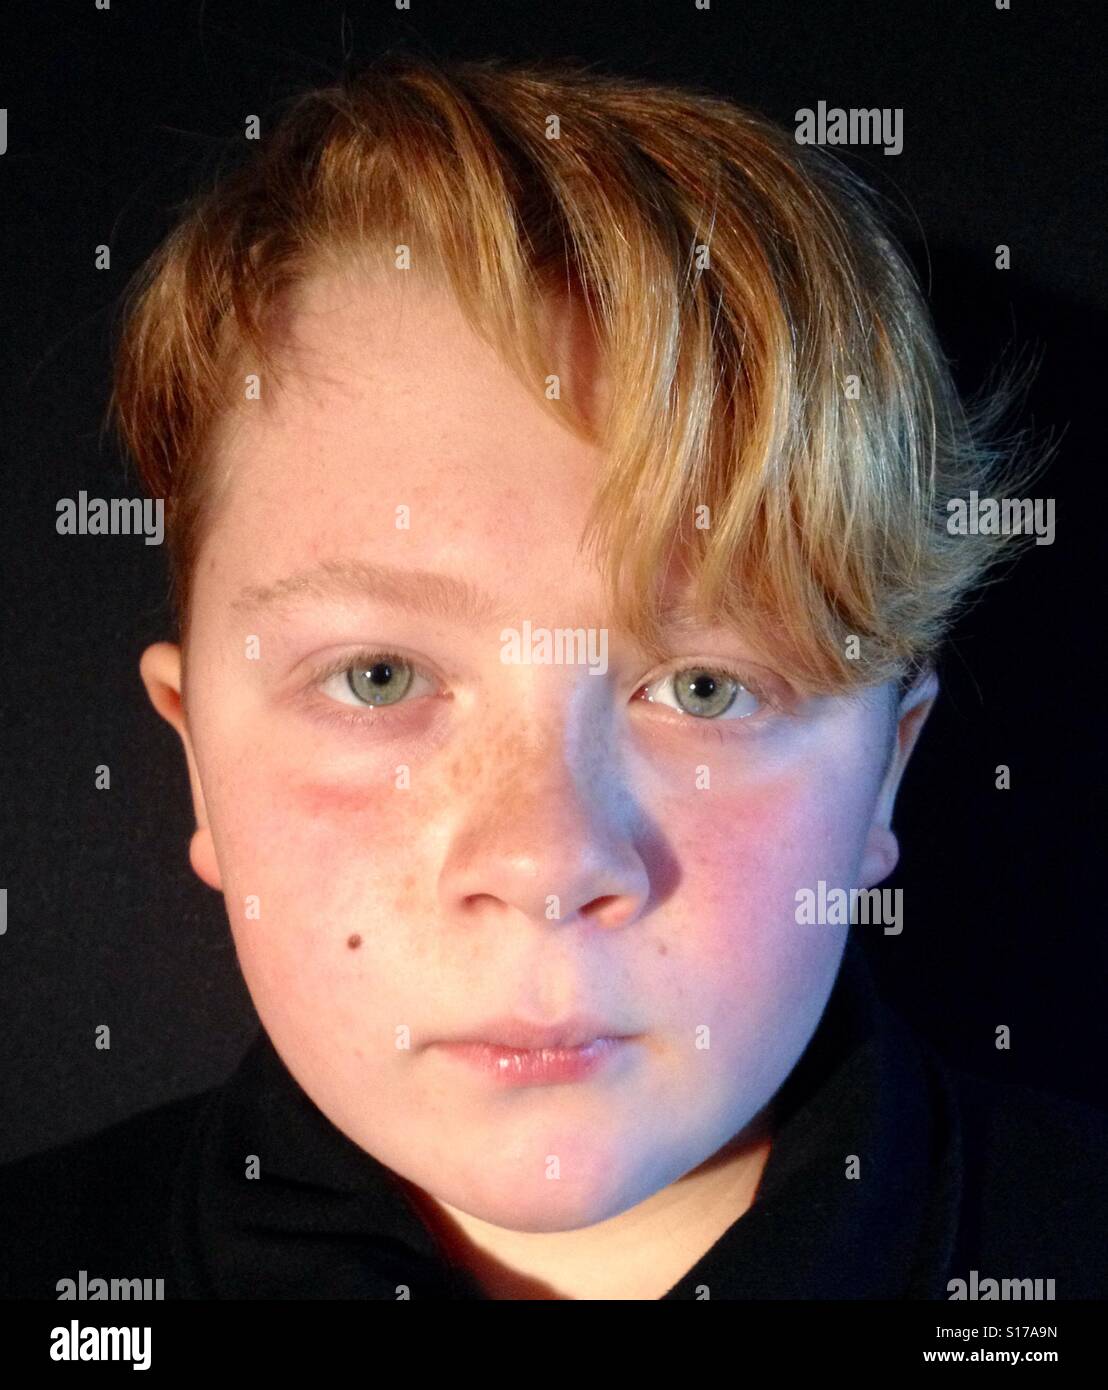 12-year old boy with ginger hair stock photo: 310563057 - alamy